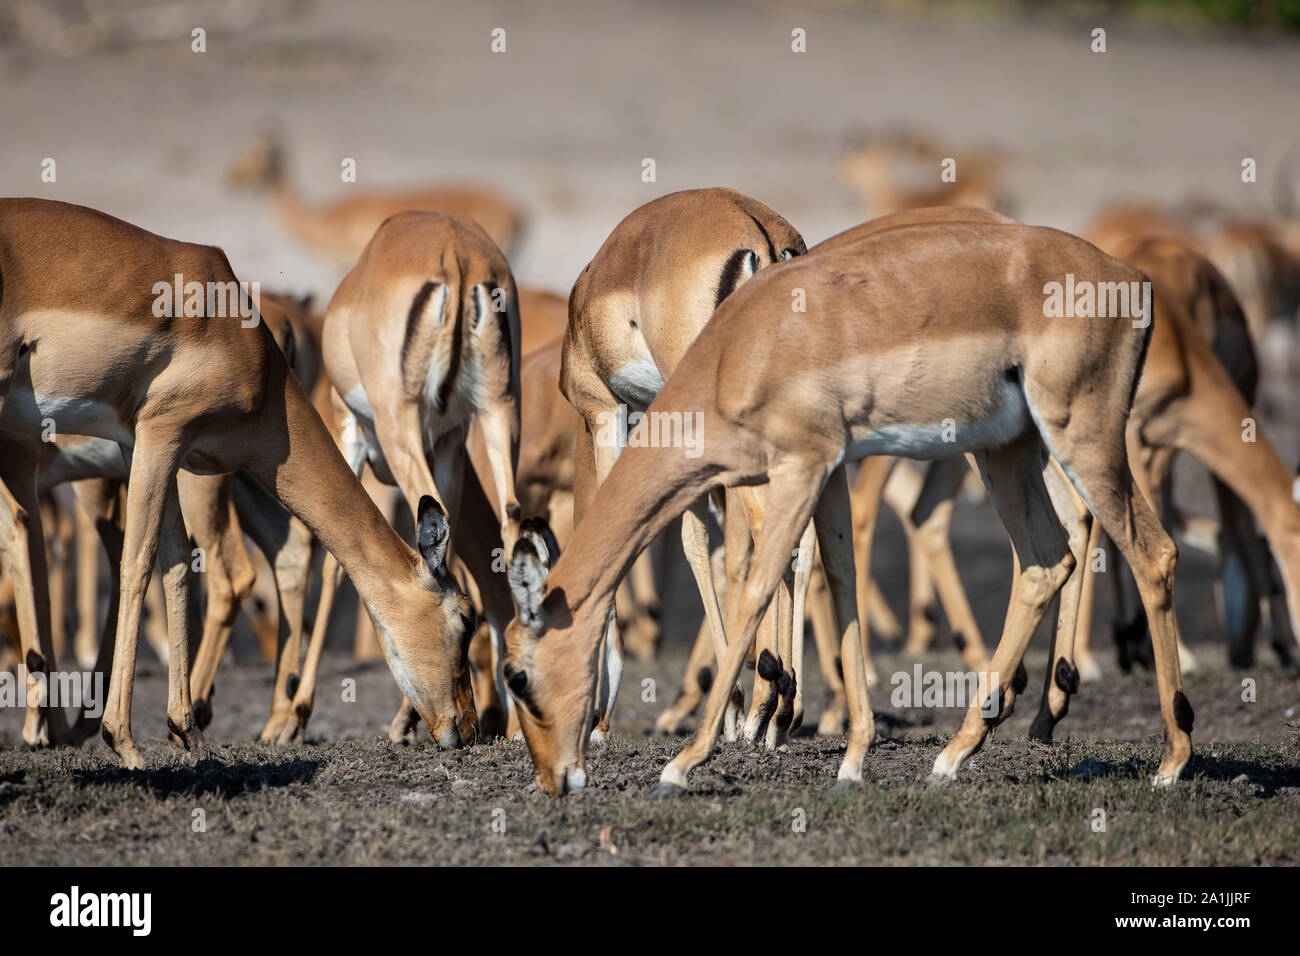 A herd of African Impala Aepyceros melampus grazing on the banks of the river Chobe in Botswana. Stock Photo